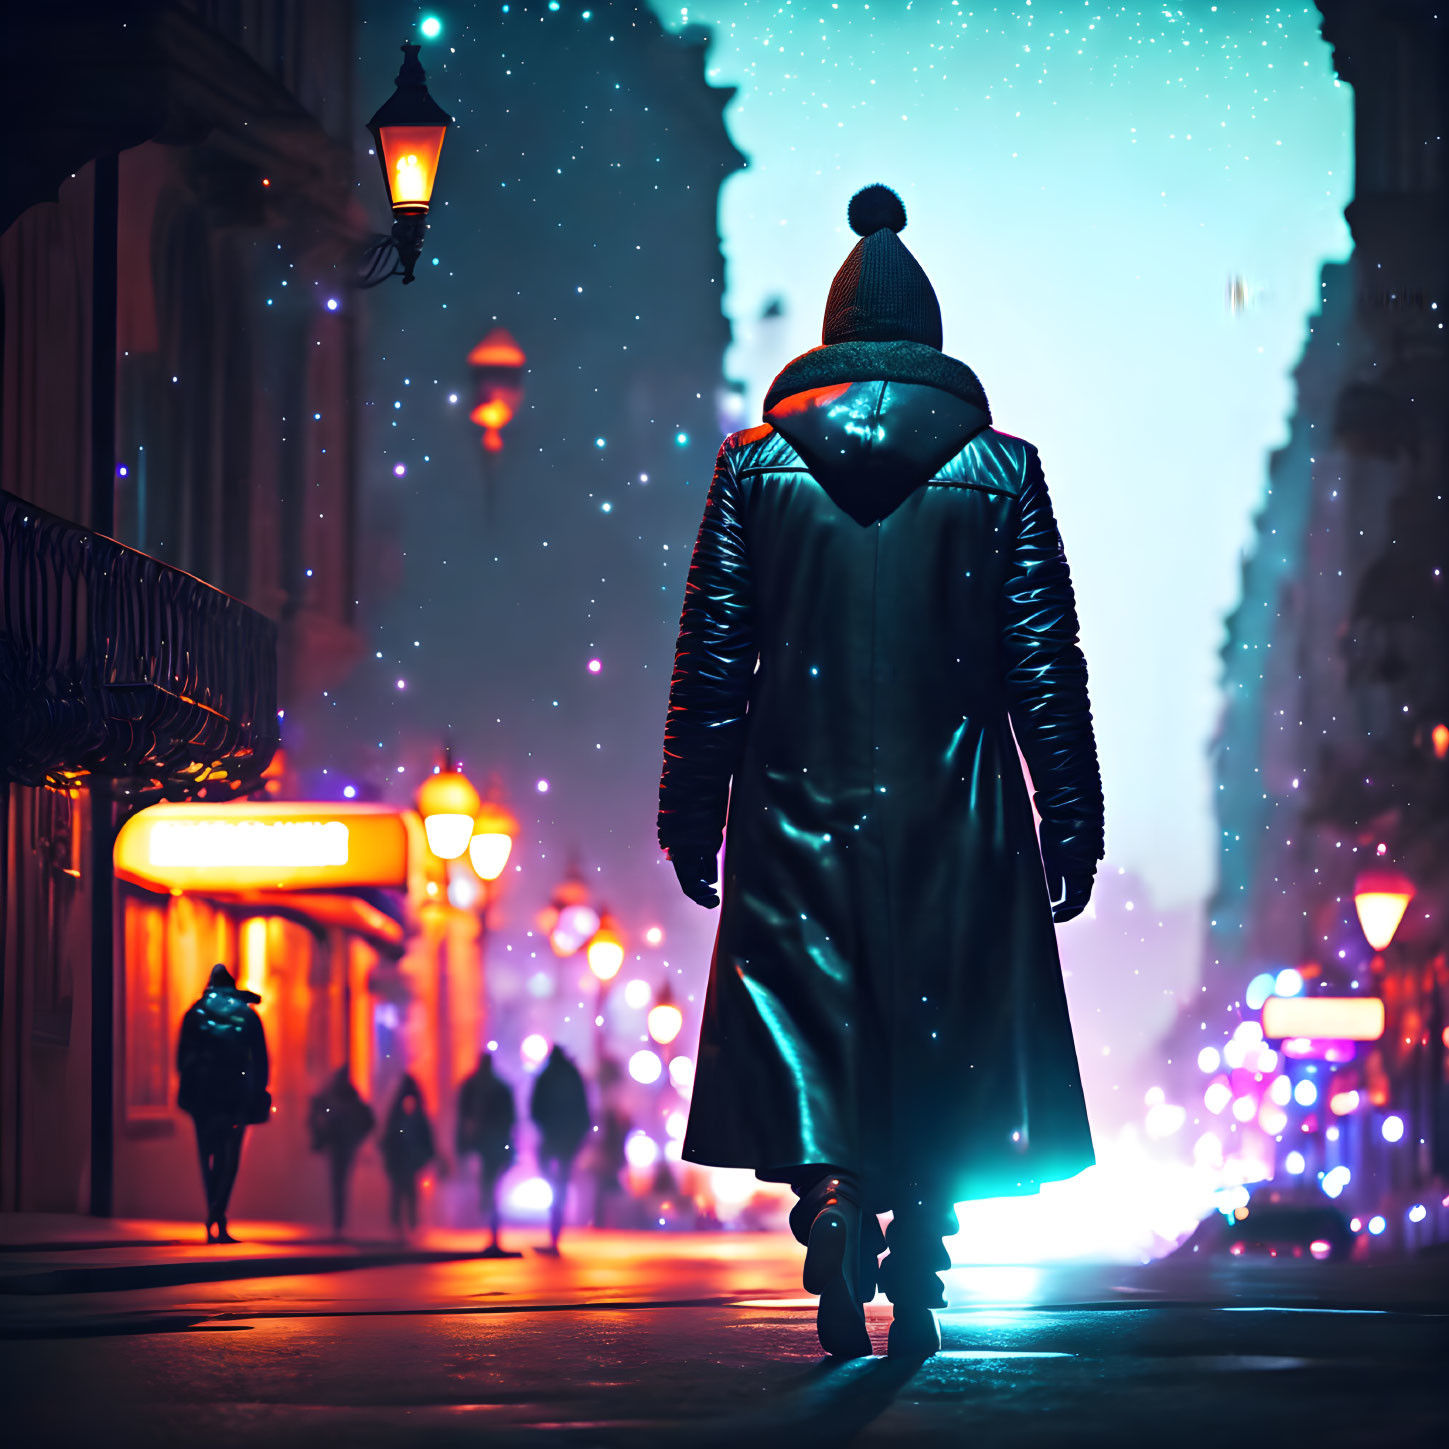 Person in winter coat walks city street at night with snowfall